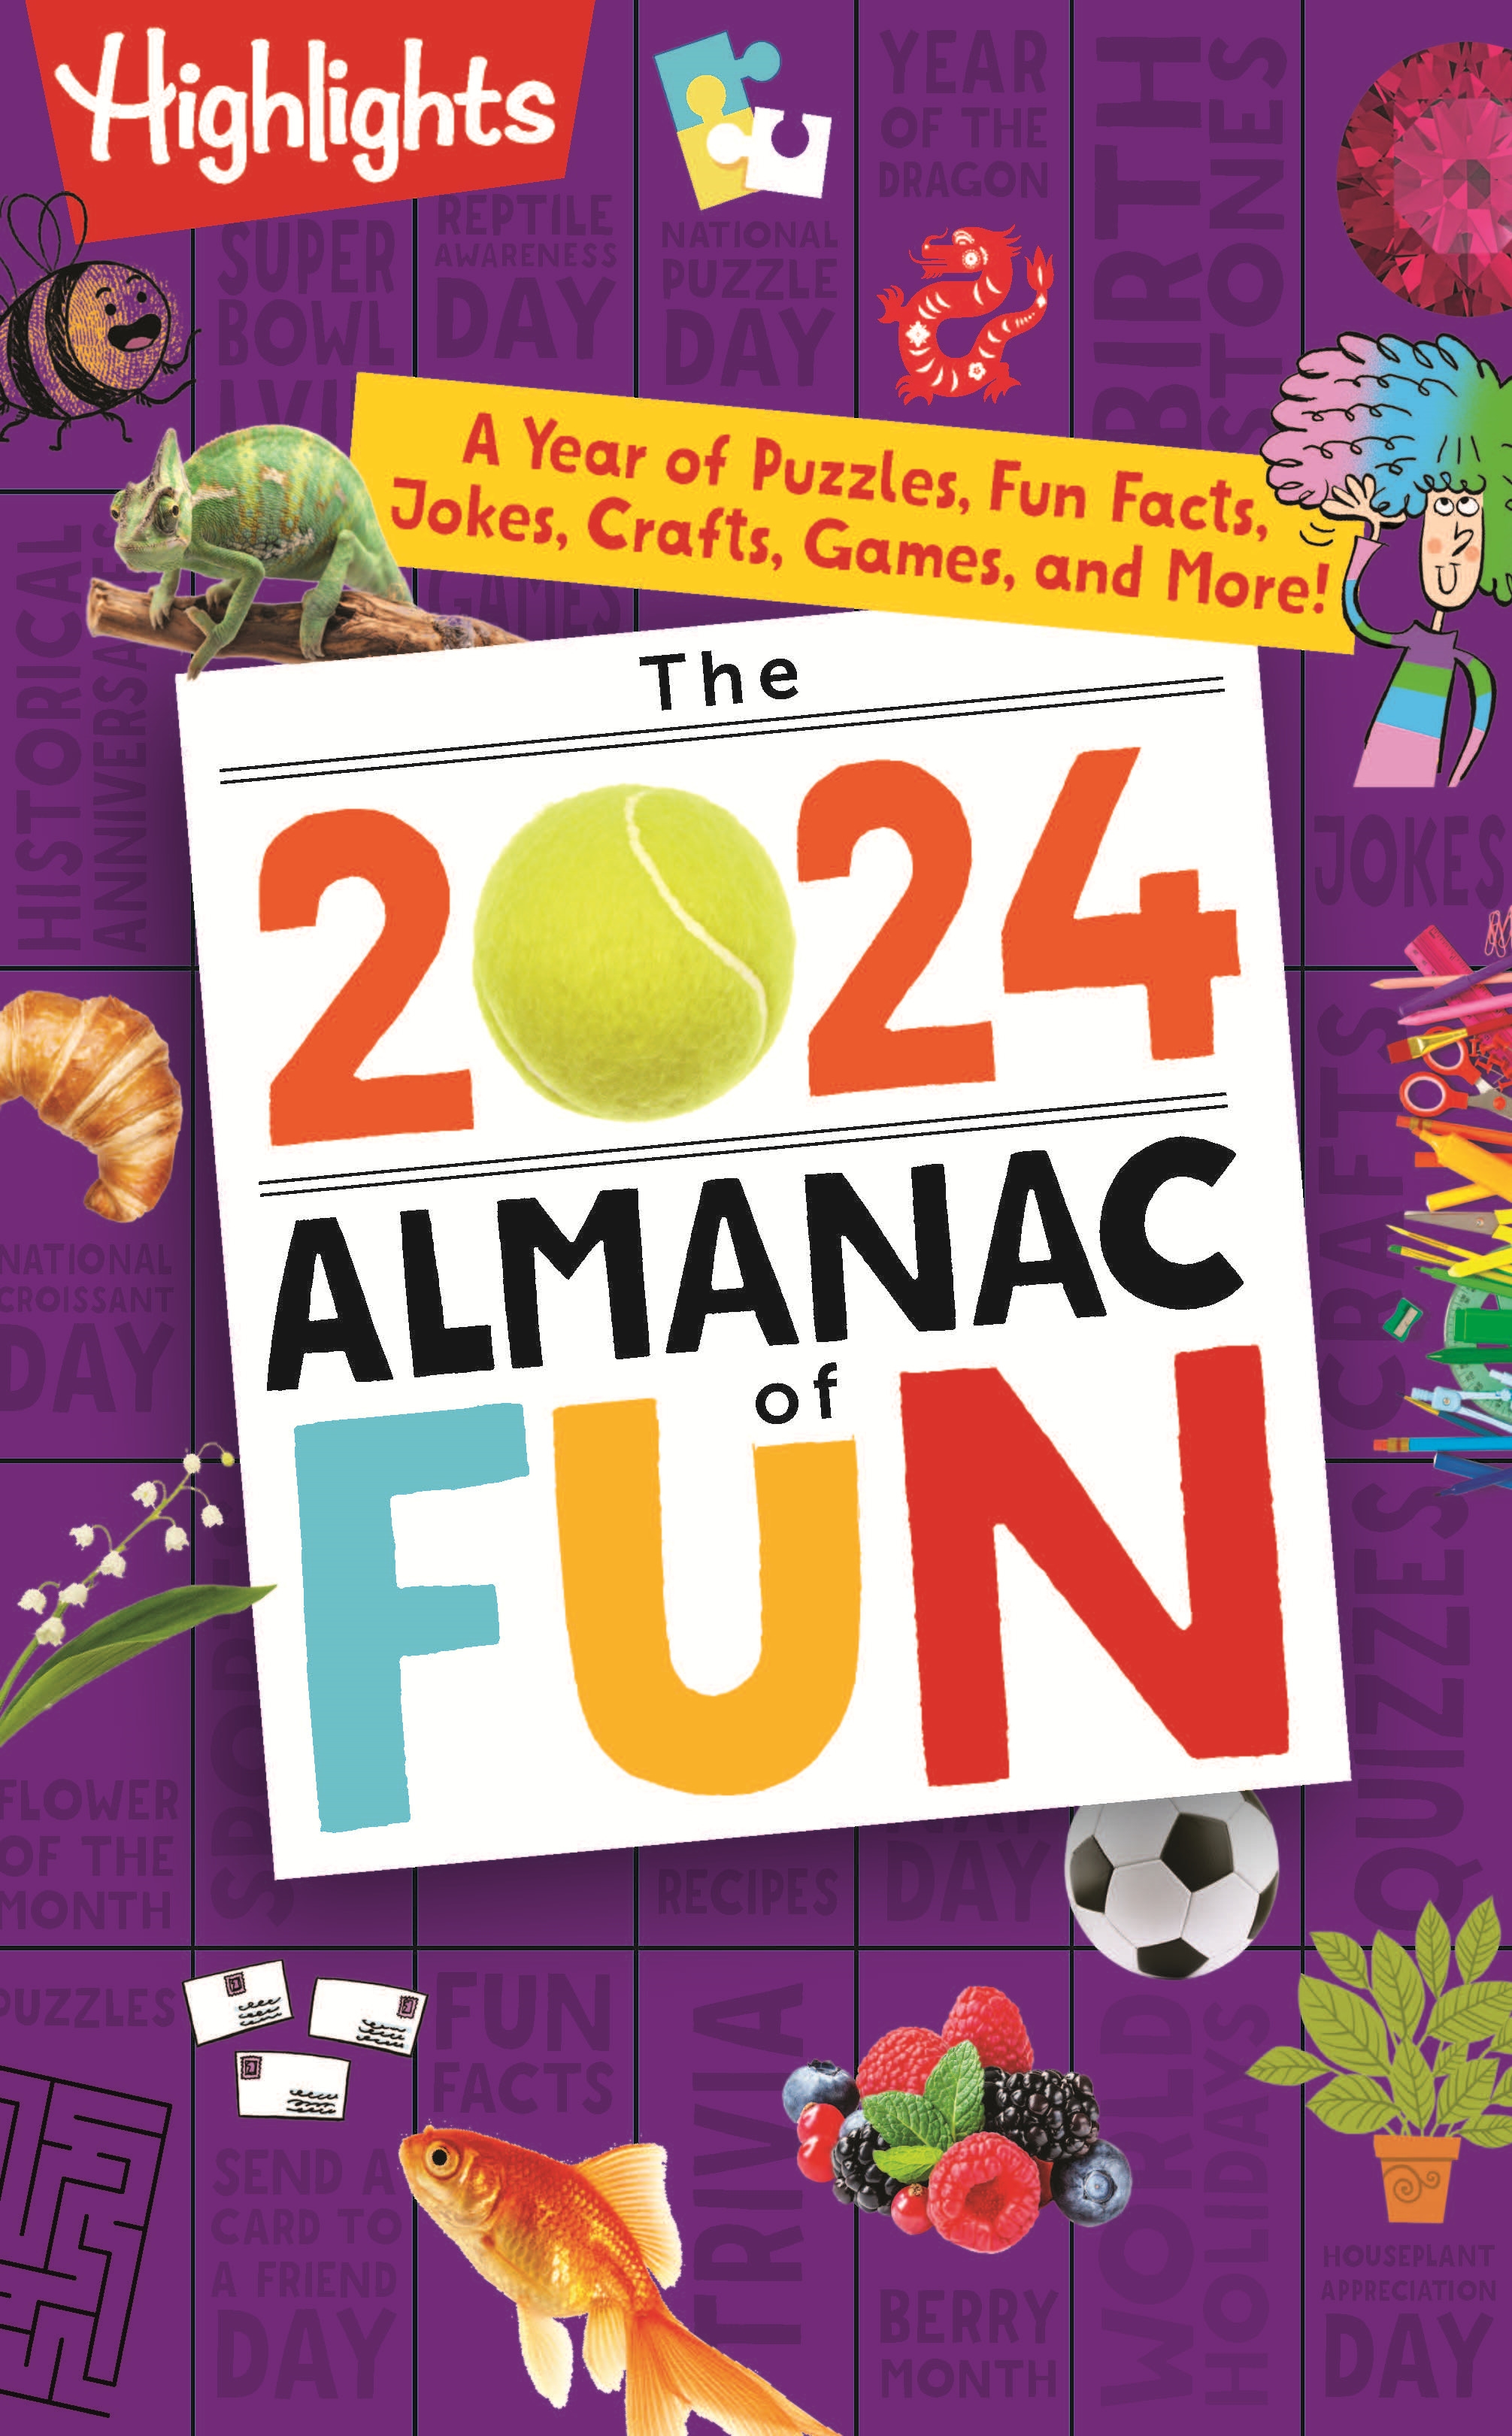 The 2024 Almanac of Fun by HIGHLIGHTS Penguin Books New Zealand